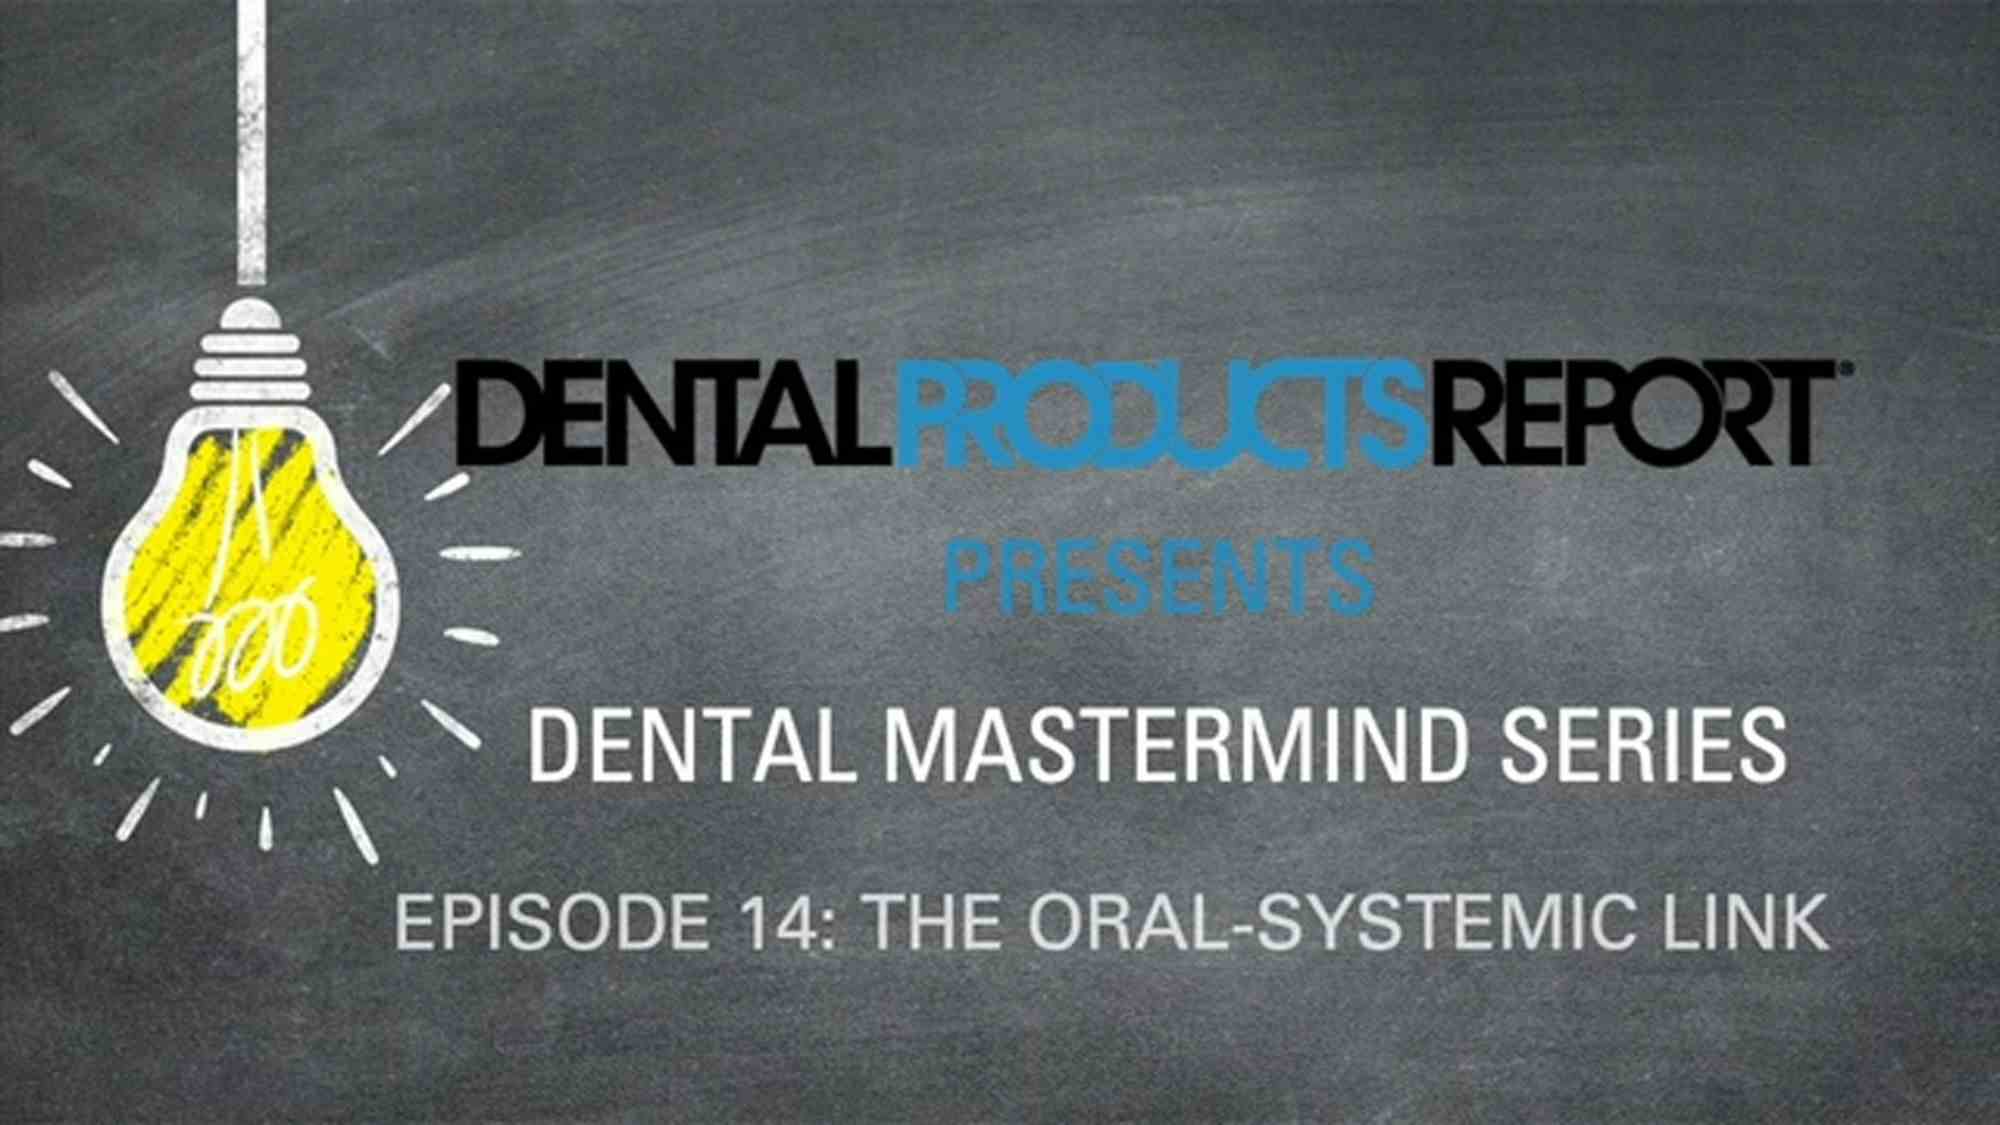 Mastermind - Episode 14 - The Oral-Systemic Link